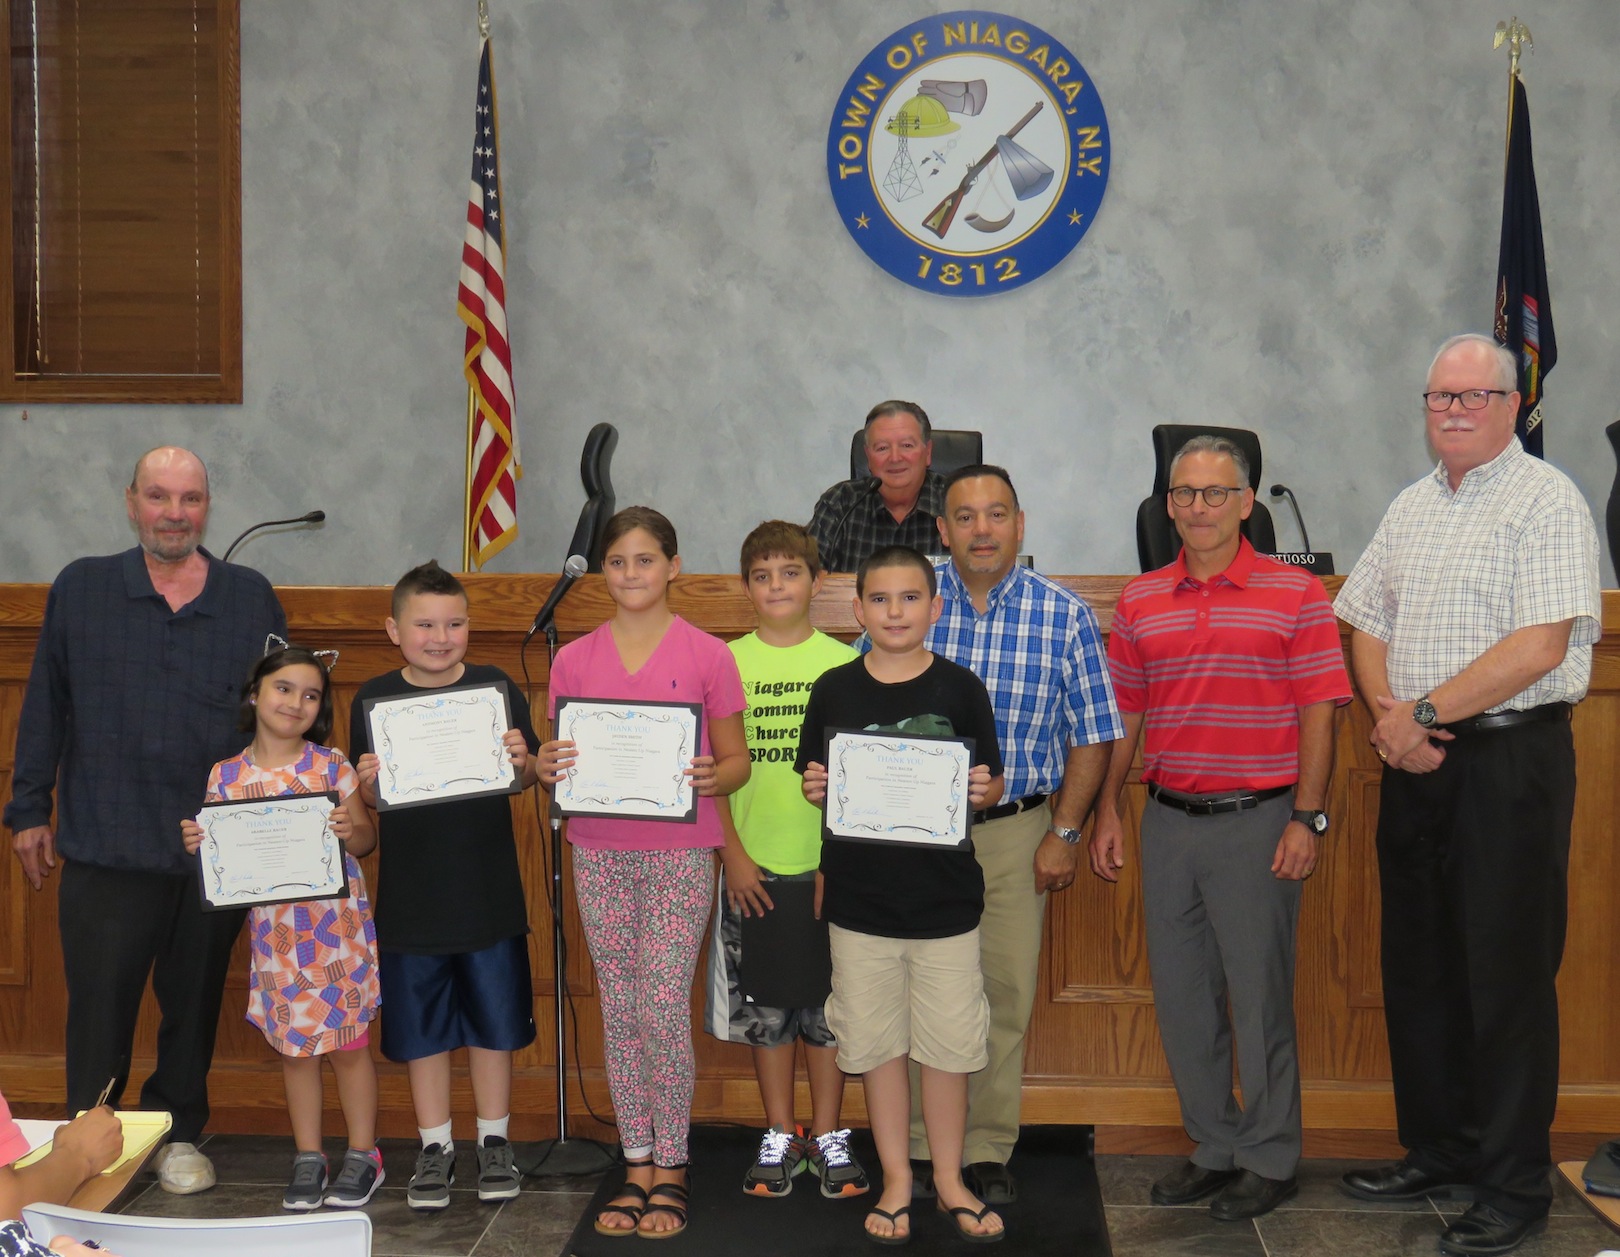 Pictured are Jayden Smith, Aleczander Smith, Paul Bauer, Arabelle Bauer and Anthony Bauer with Town of Niagara Supervisor Lee Wallace and councilmen Rich Sirianni, Charles Teixeira, Sam Gatto and Marc Carpenter. (Photo by David Yarger)